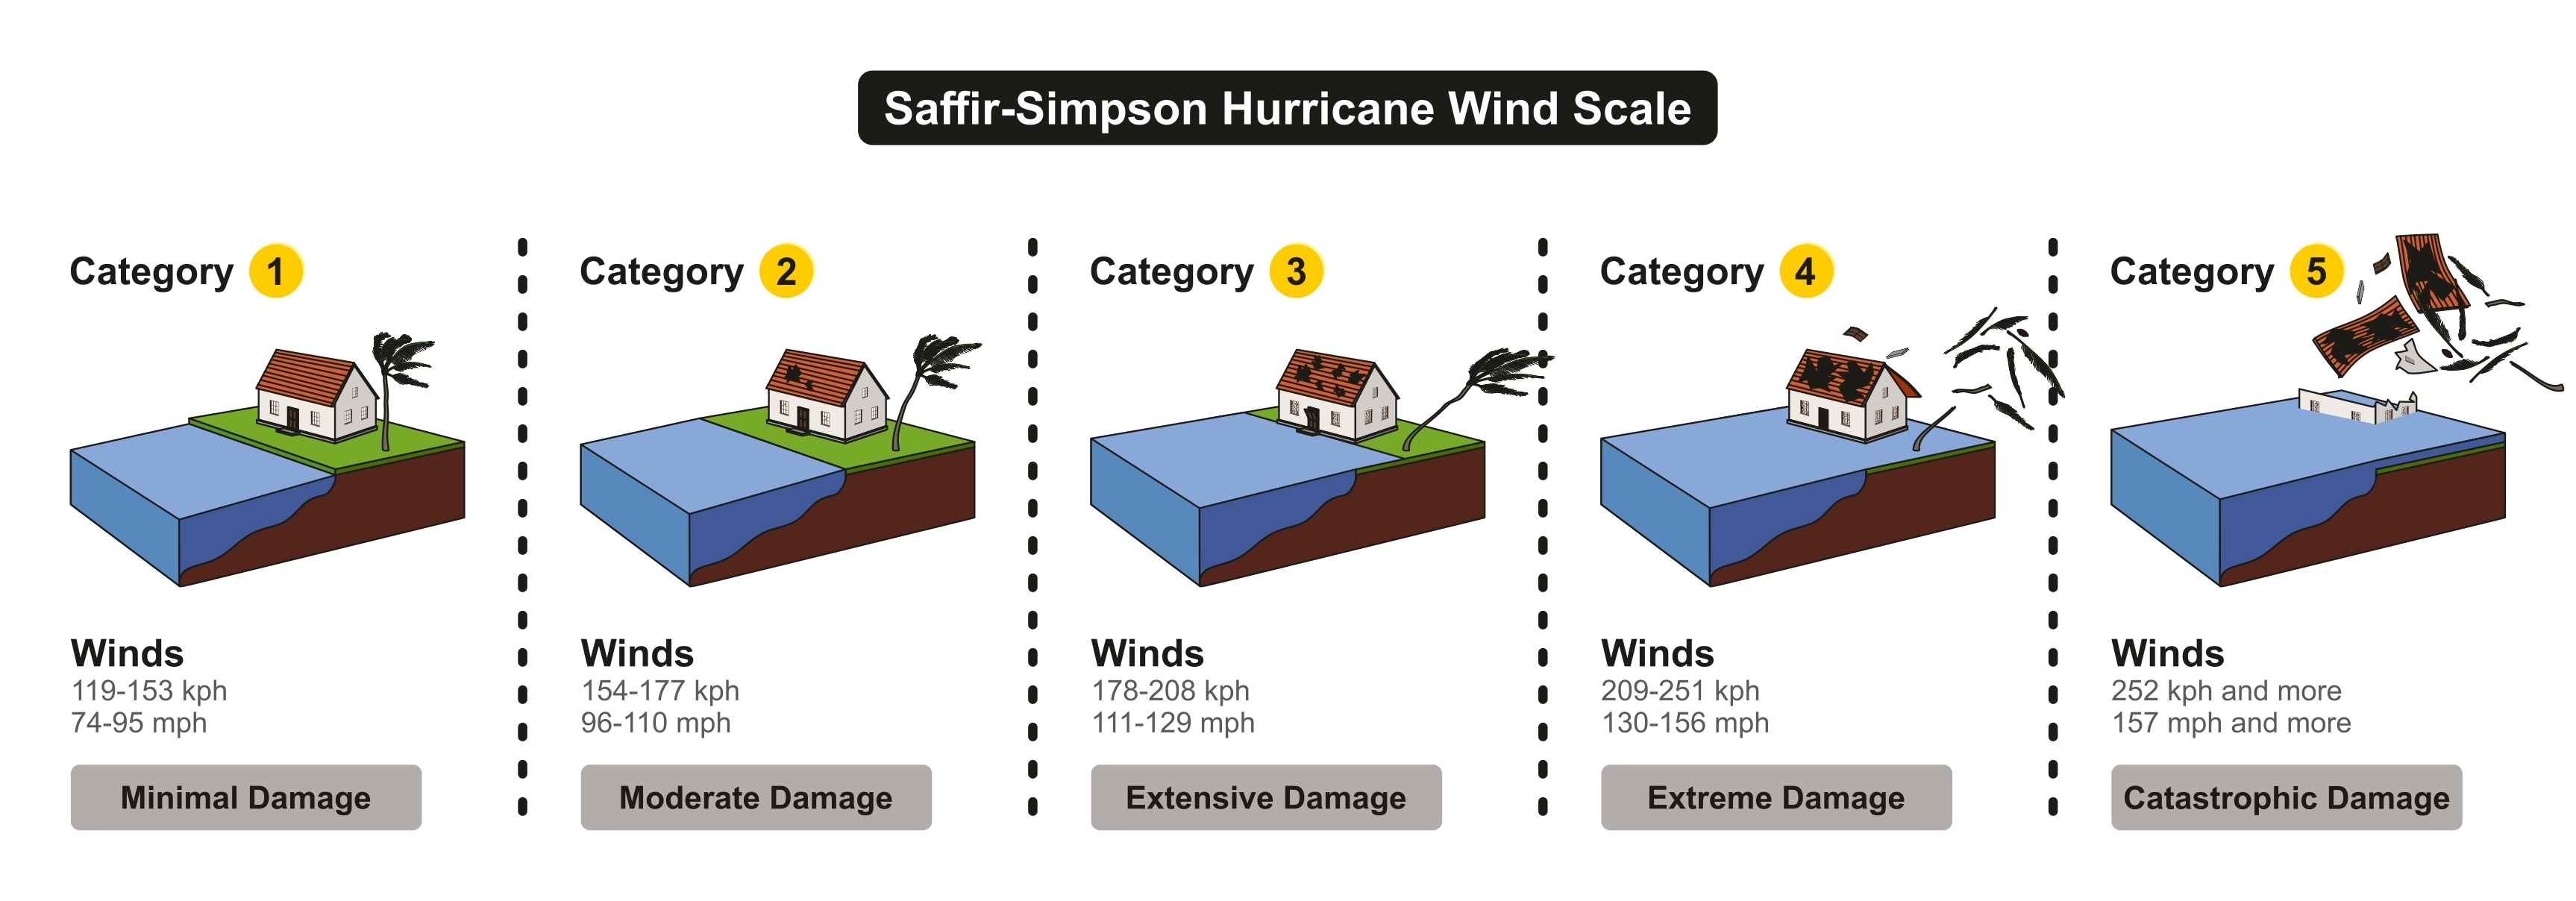 Hurricane Categories: What Categories 1, 2, 3, 4, 5, 6 Mean